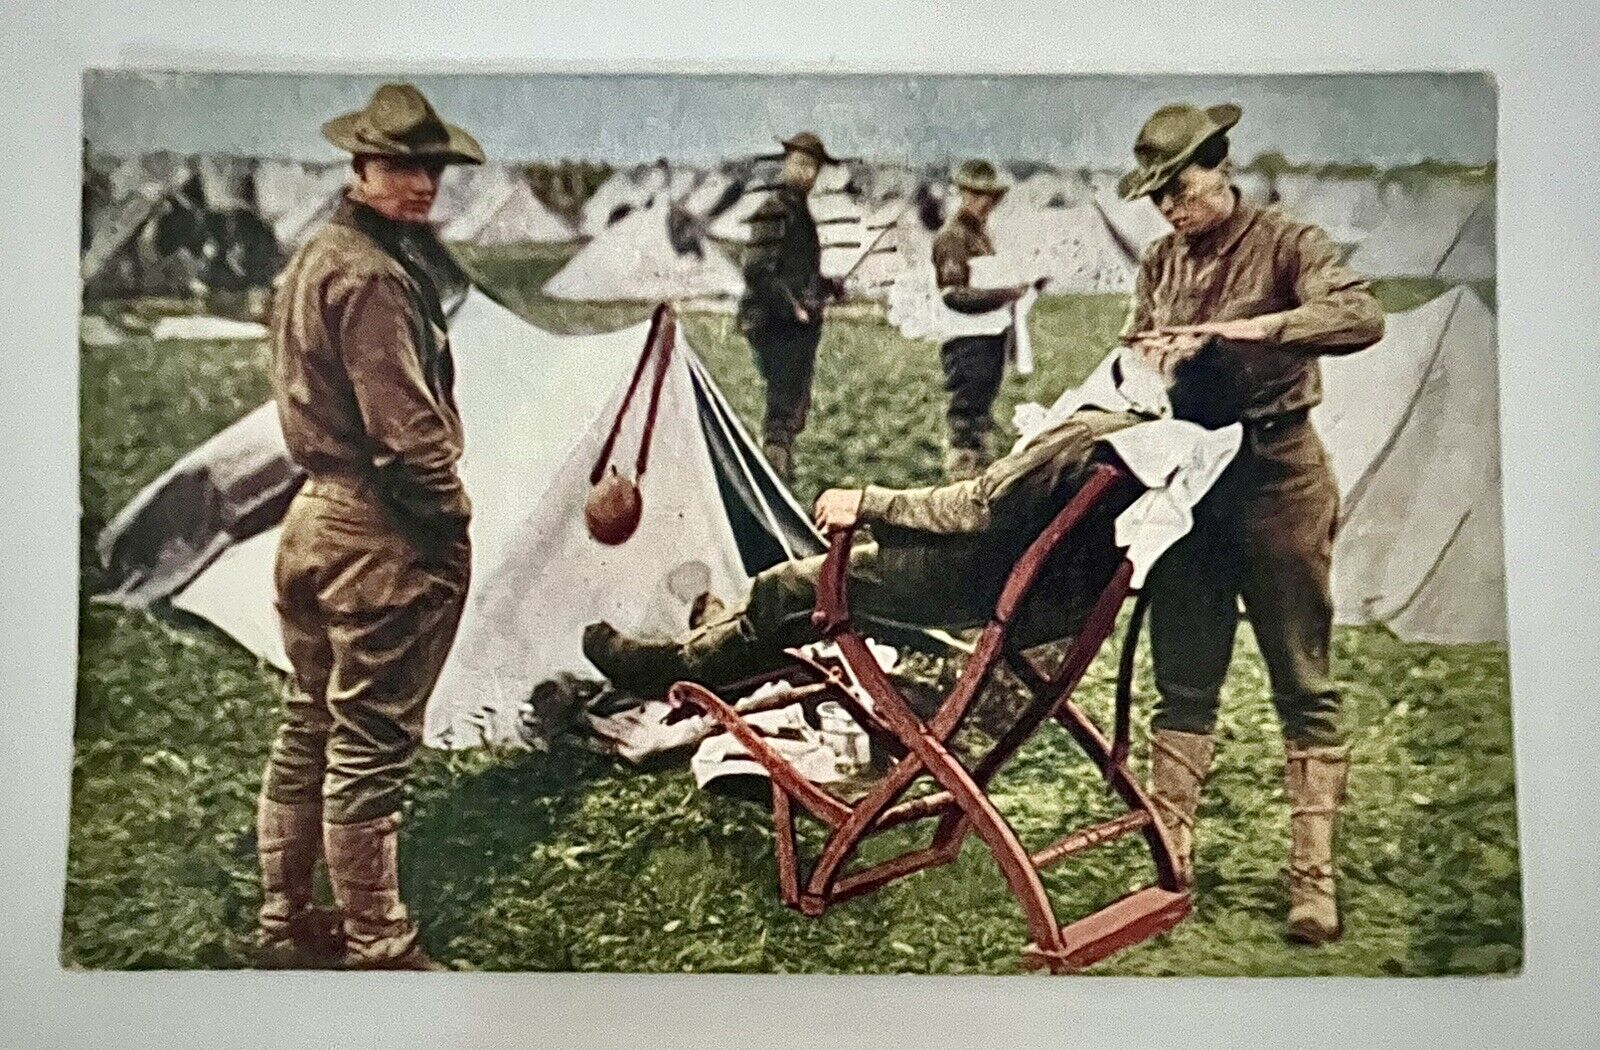 WW1 1916 ANTIQUE POSTCARD In the Field ARMY Wounded Soldier COMBAT Uniform RPPC